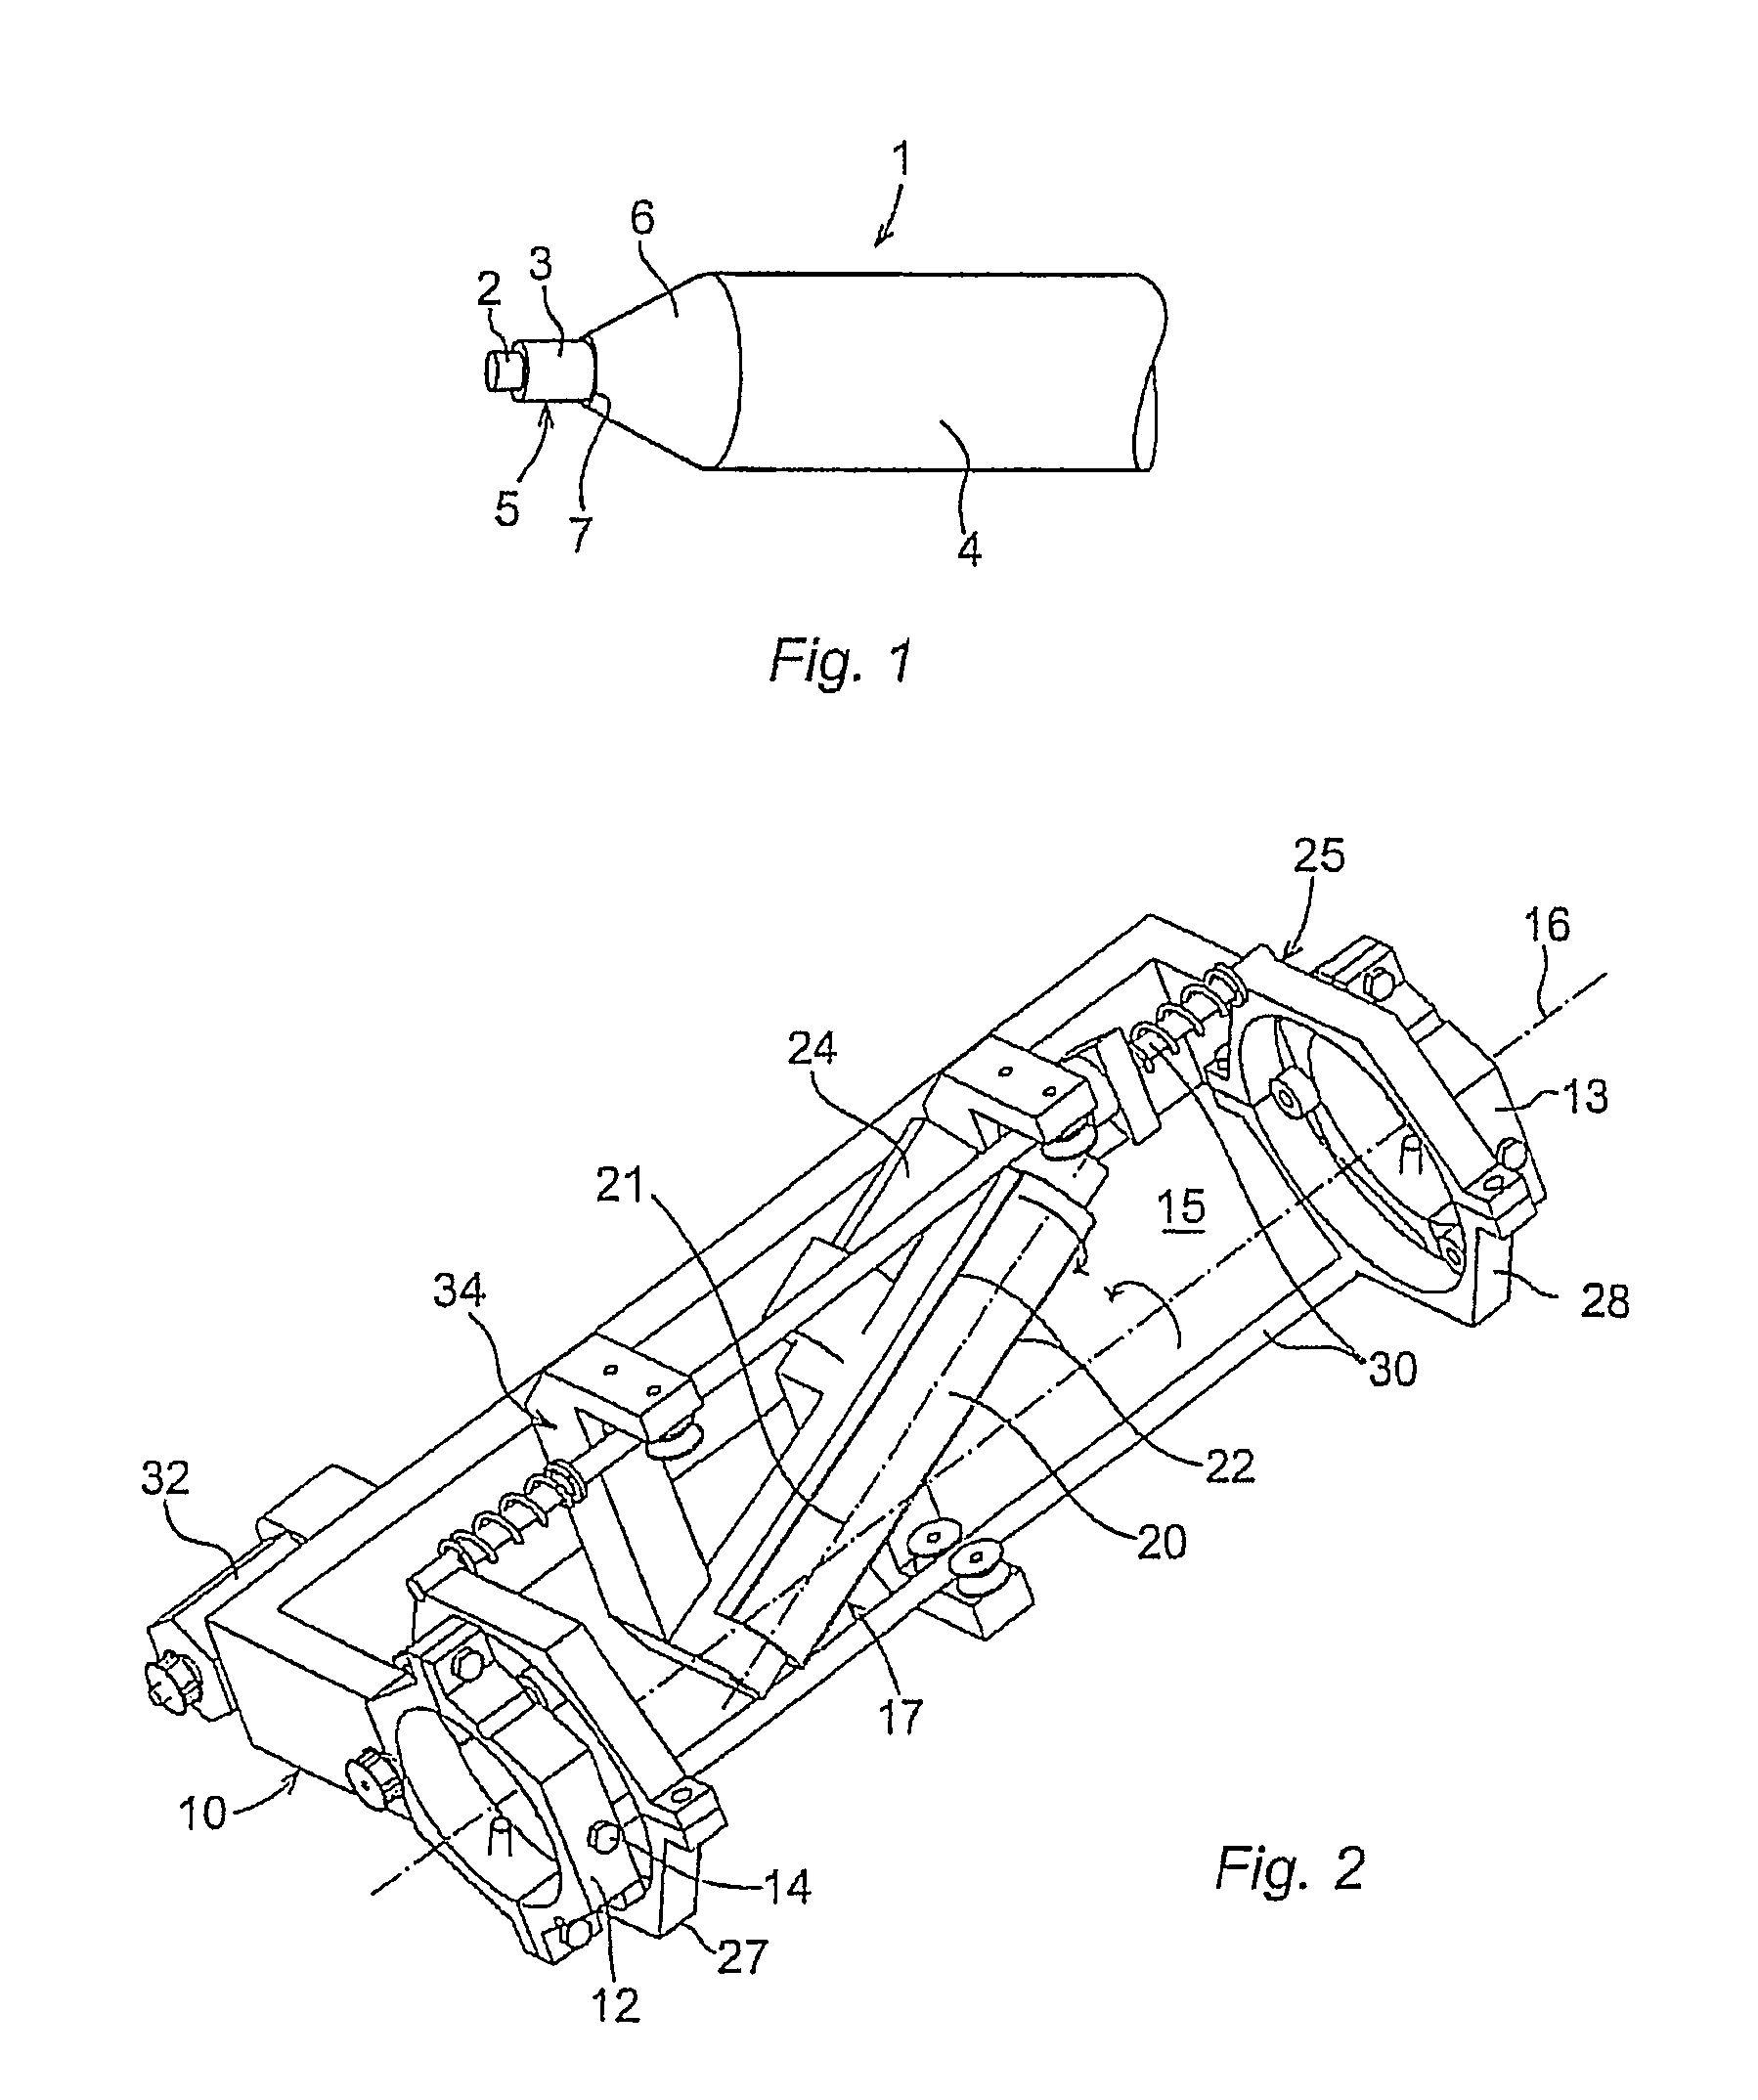 Device and method for machining an electrical cable